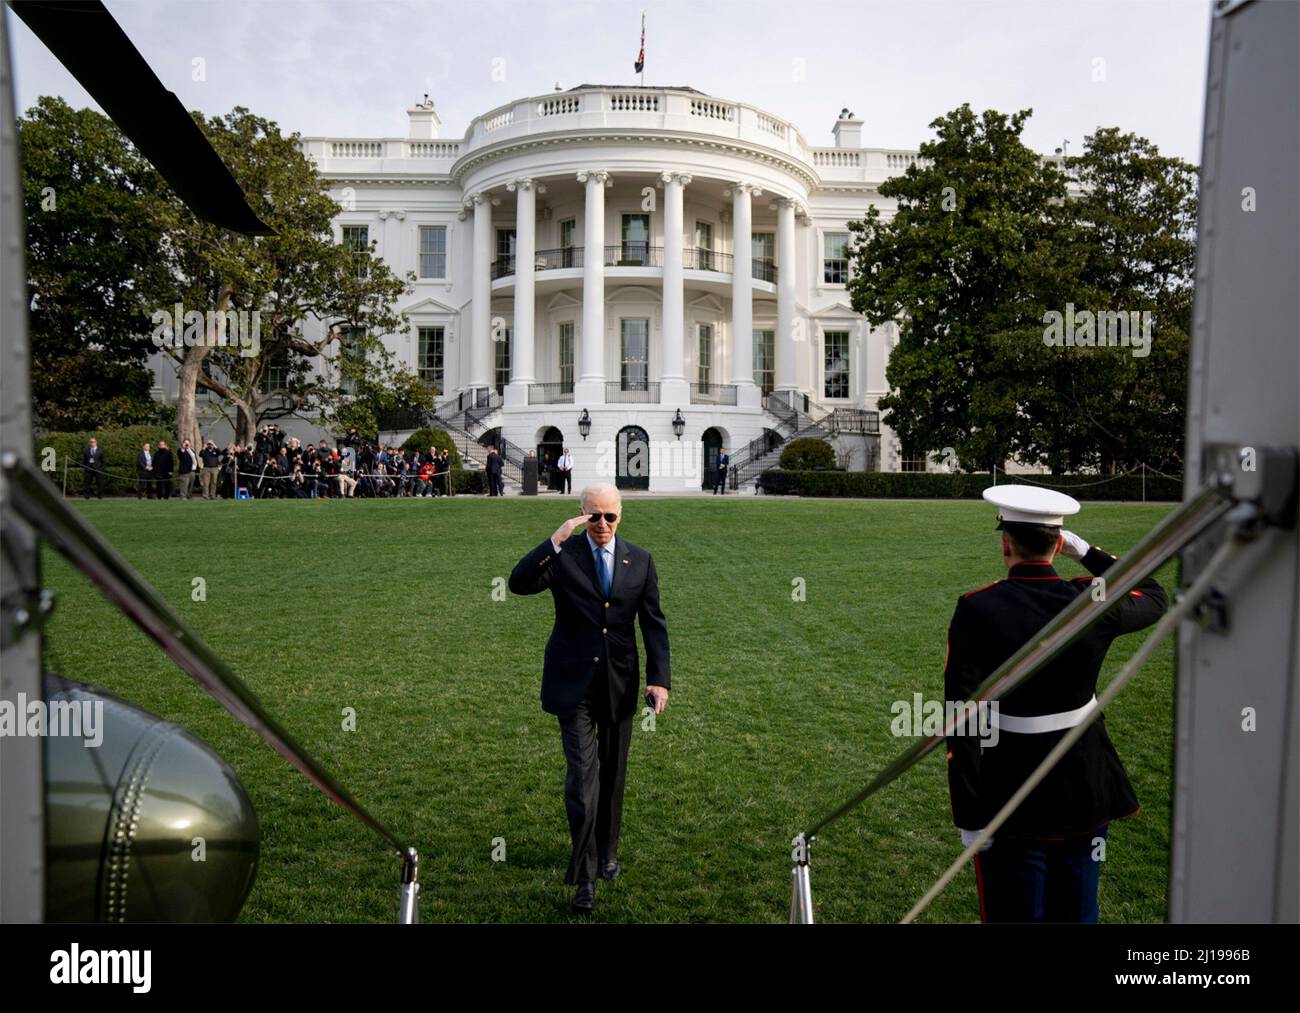 Washington, United States Of America. 23rd Mar, 2022. Washington, United States of America. 23 March, 2022. U.S President Joe Biden salutes as he boards Marine One helicopter to depart from the South Lawn of the White House, March 23, 2022 in Washington, DC Biden is departing on a trip to Brussels and Poland to continue pushing for Ukraine support. Credit: Adam Schultz/White House Photo/Alamy Live News Stock Photo